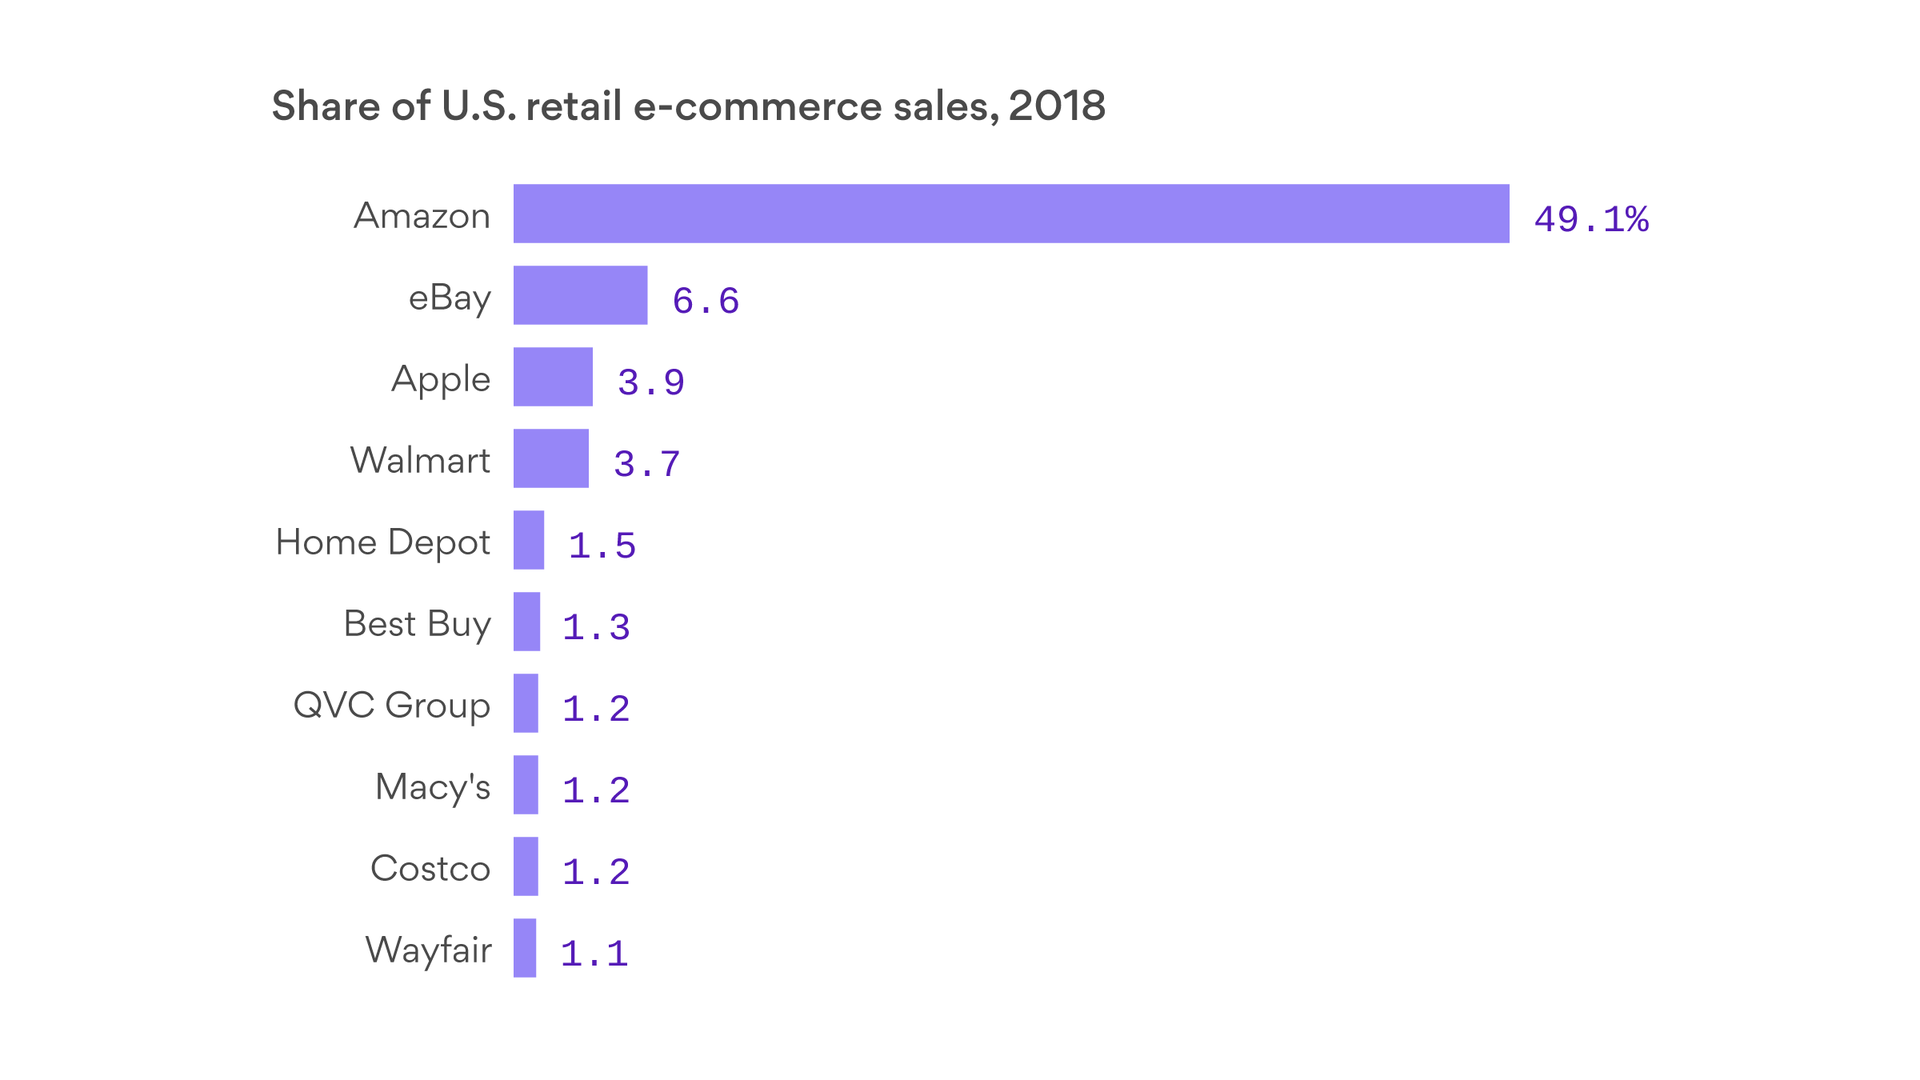 Marisa Fernandez — Amazon leaves retail competitors in the dust, claims 50% of U.S. e-commerce market